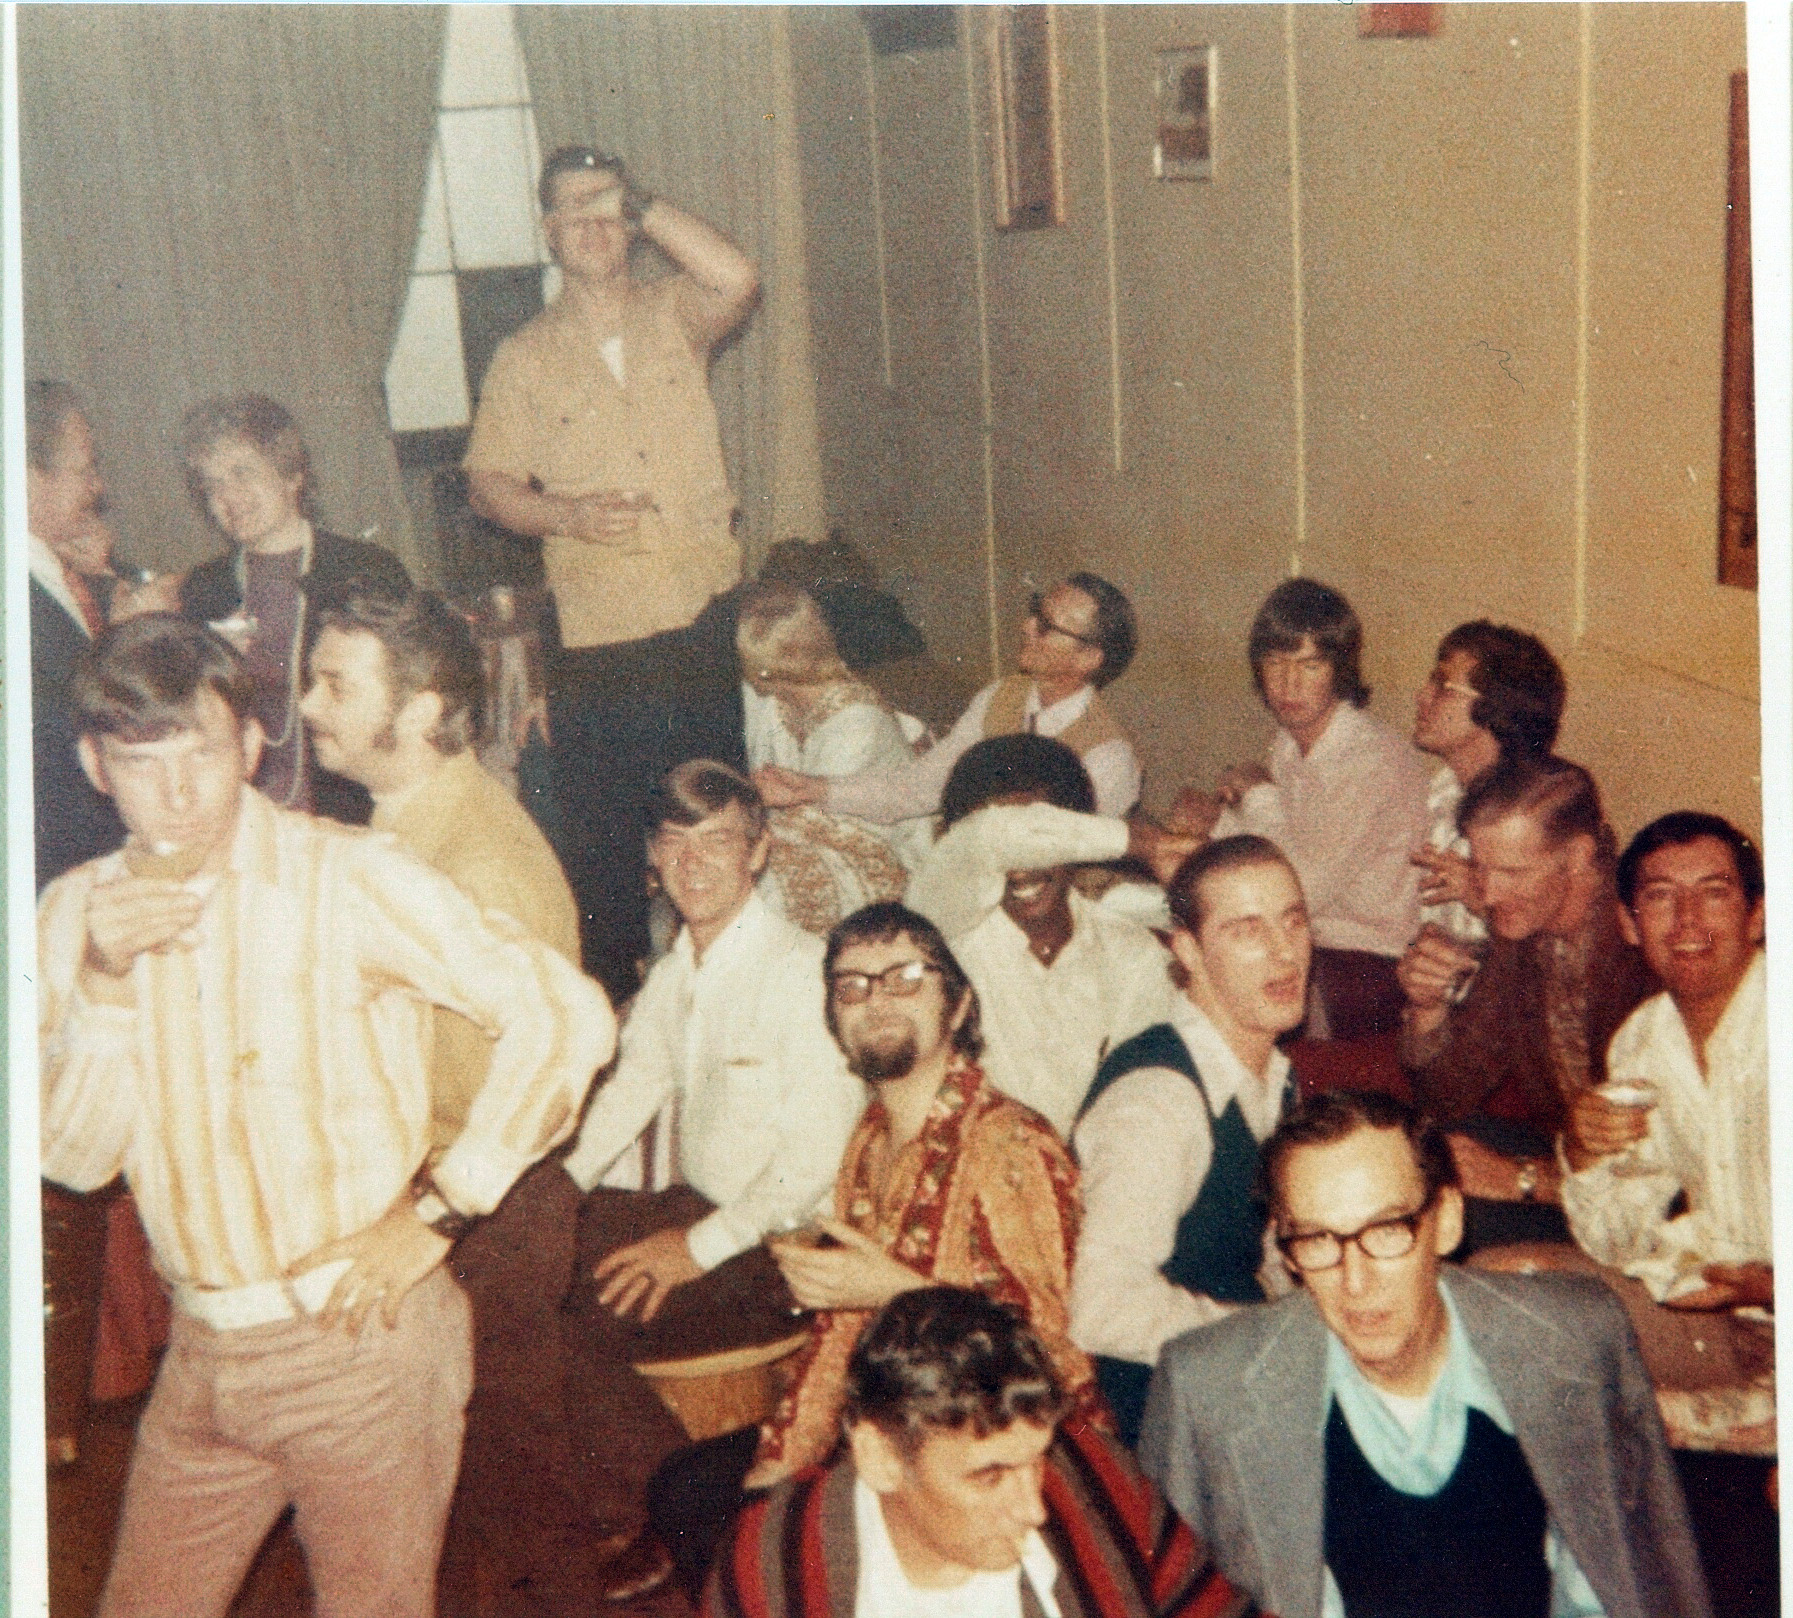 PHOTO: Patrons of the UpStairs Lounge are pictured in an undated handout photo.